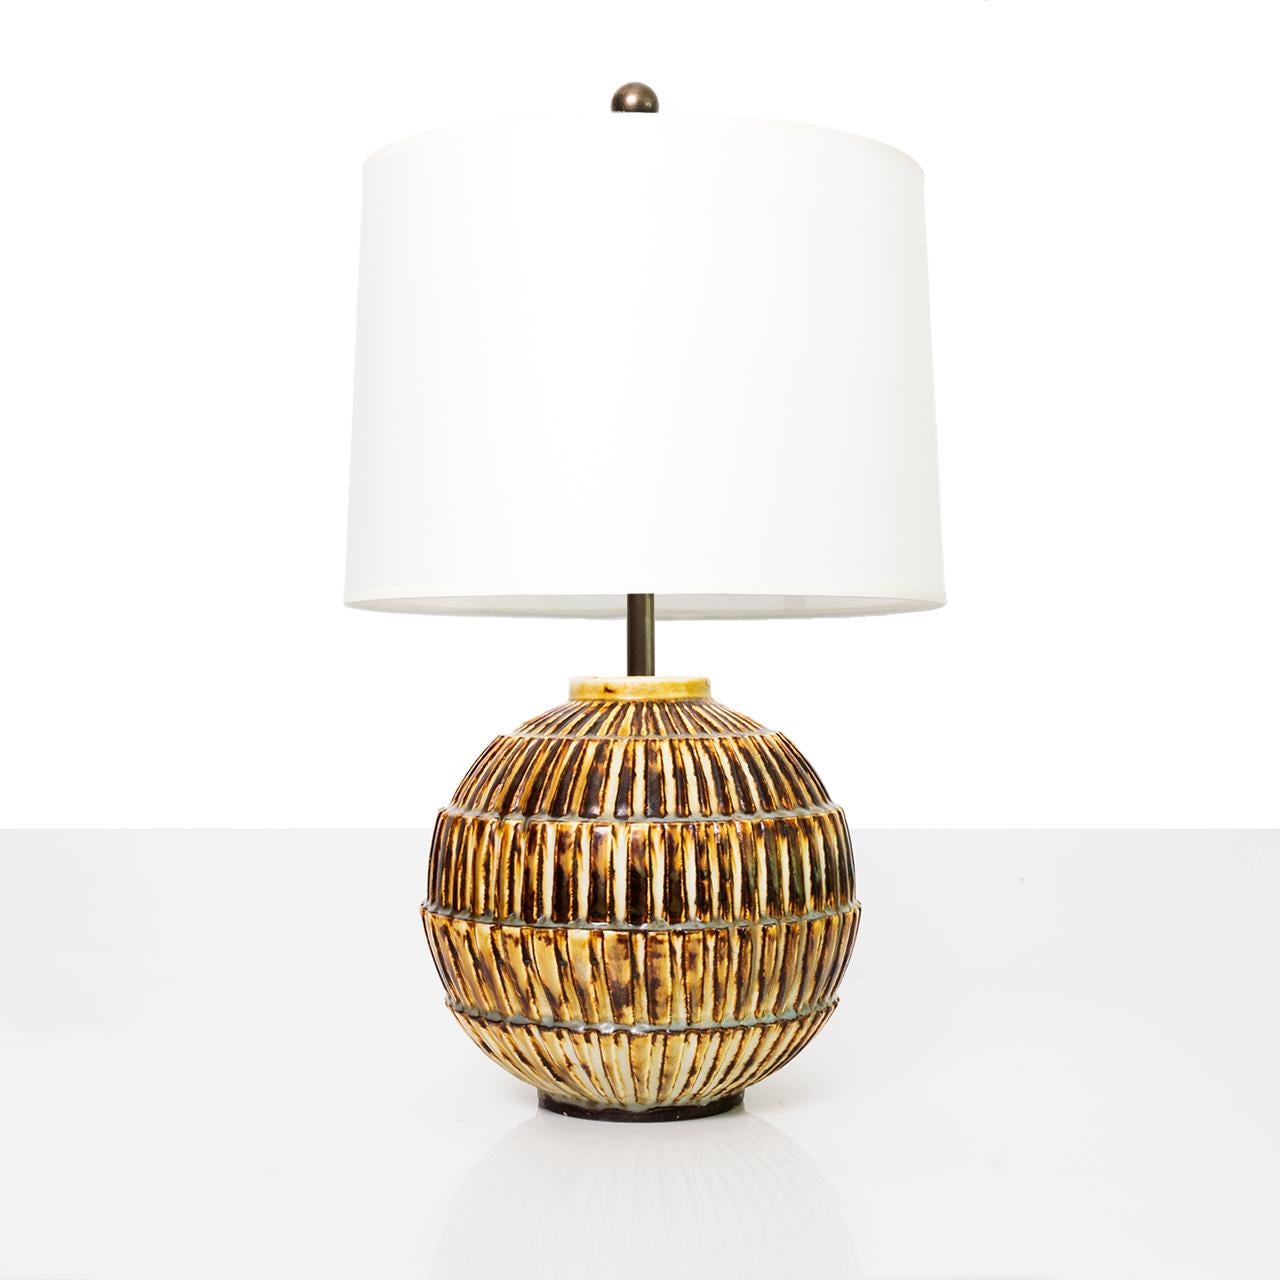 Large and rare Swedish art deco unique ceramic studio lamp by Gertrud Lonegren. Her pieces are known for strongly textured surfaces combined with subtle use of glazes. Lamp has been rewired with a polished and lacquered brass double cluster and two